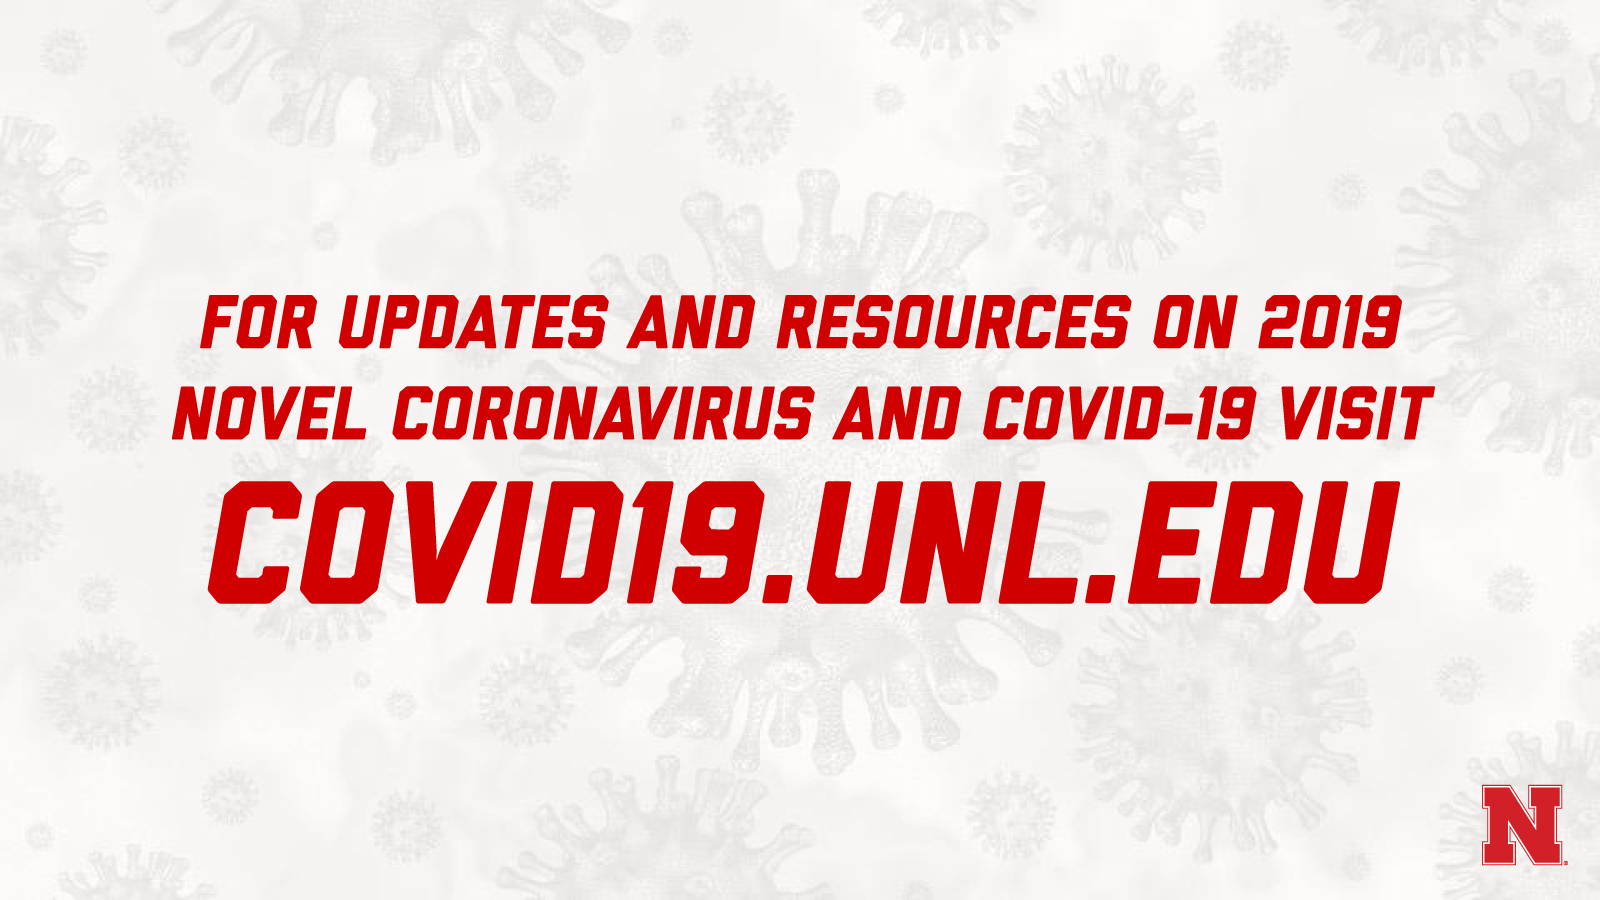 Information changes rapidly, so the university community is encouraged to visit resource websites for the latest information on COVID-19 updates and resources.